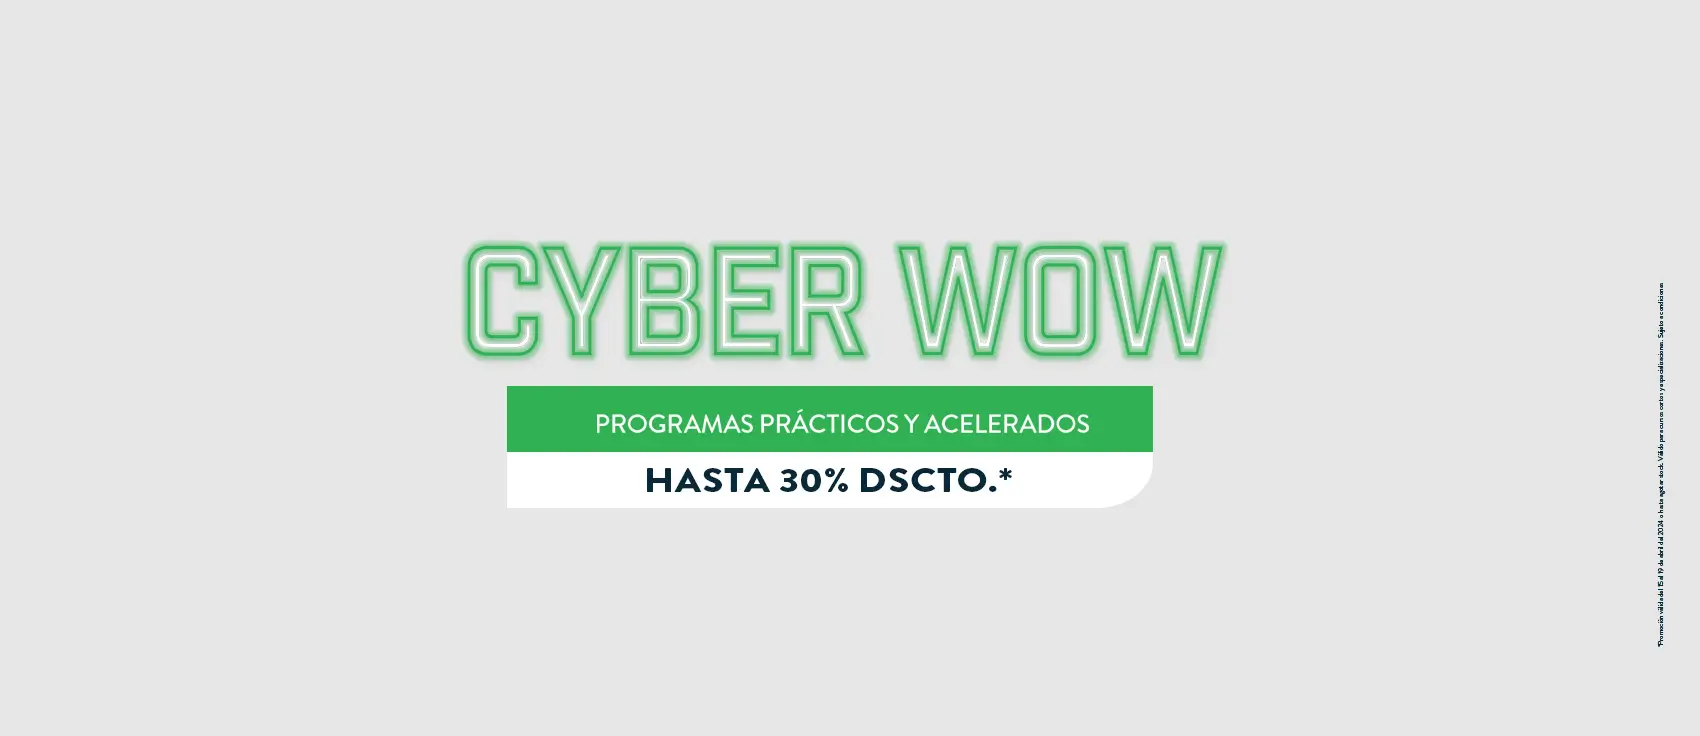 cyber wow bootcamp